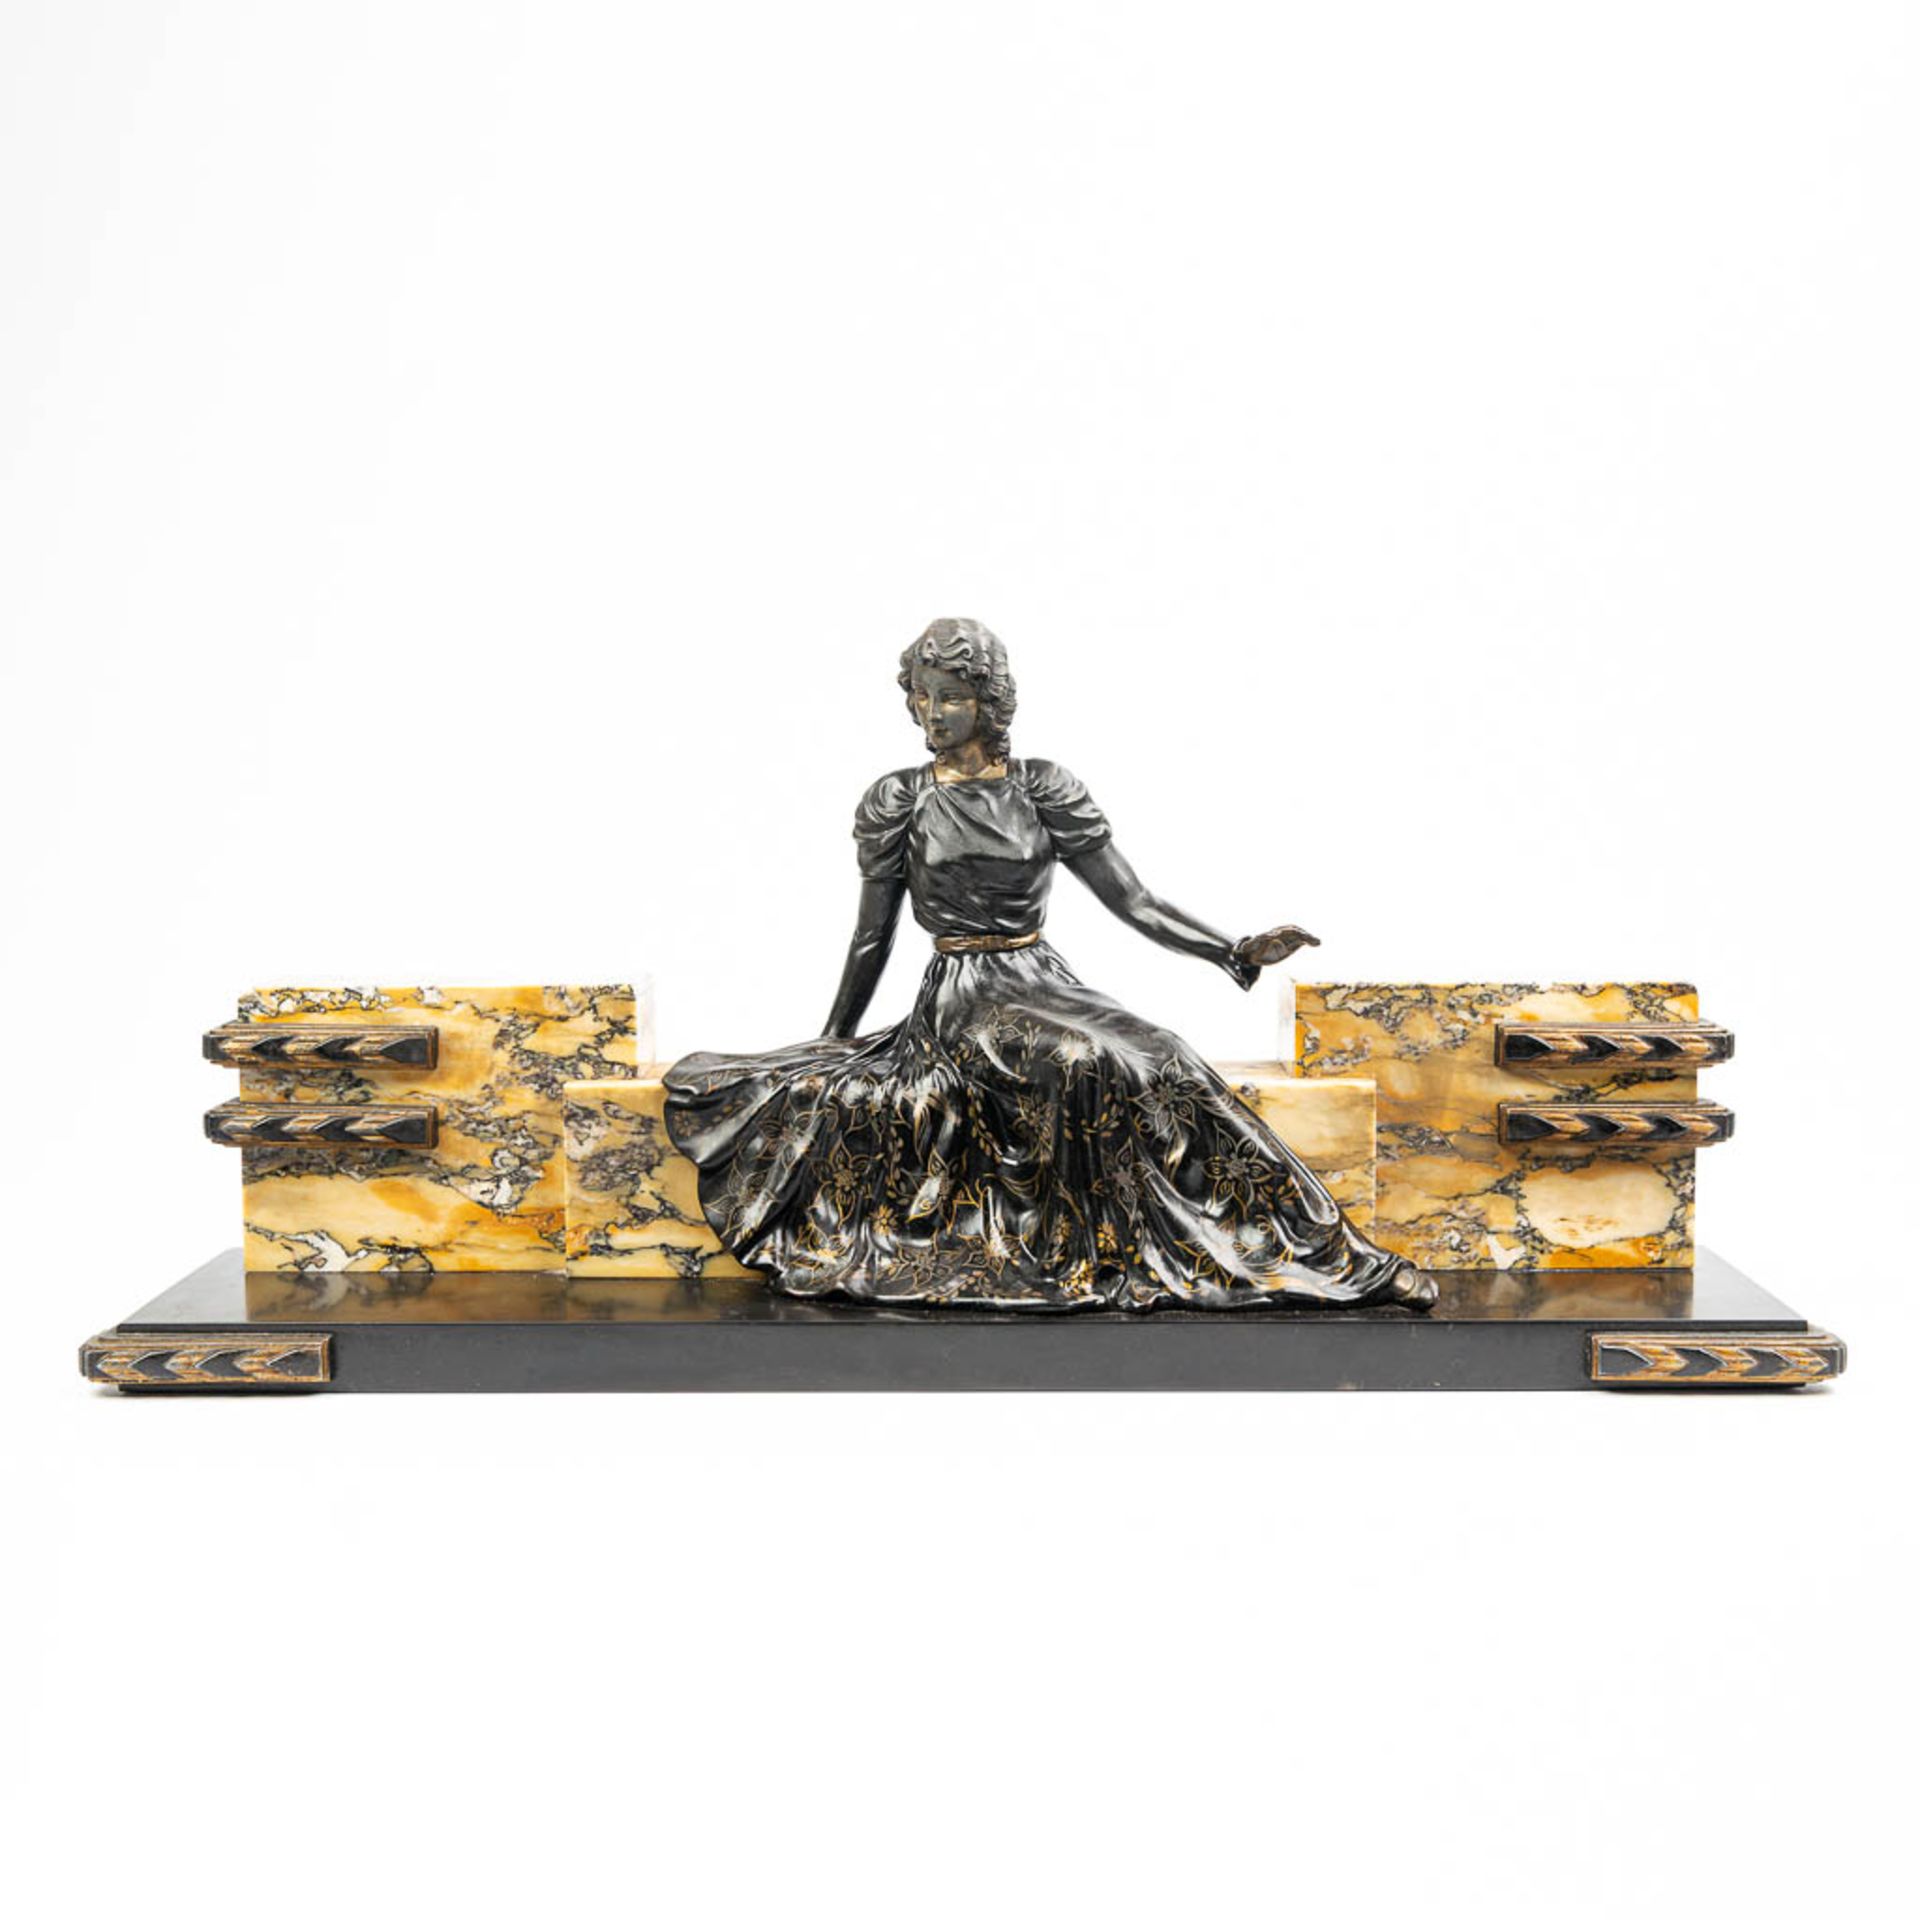 A satue made of spelter and onyx in art deco style